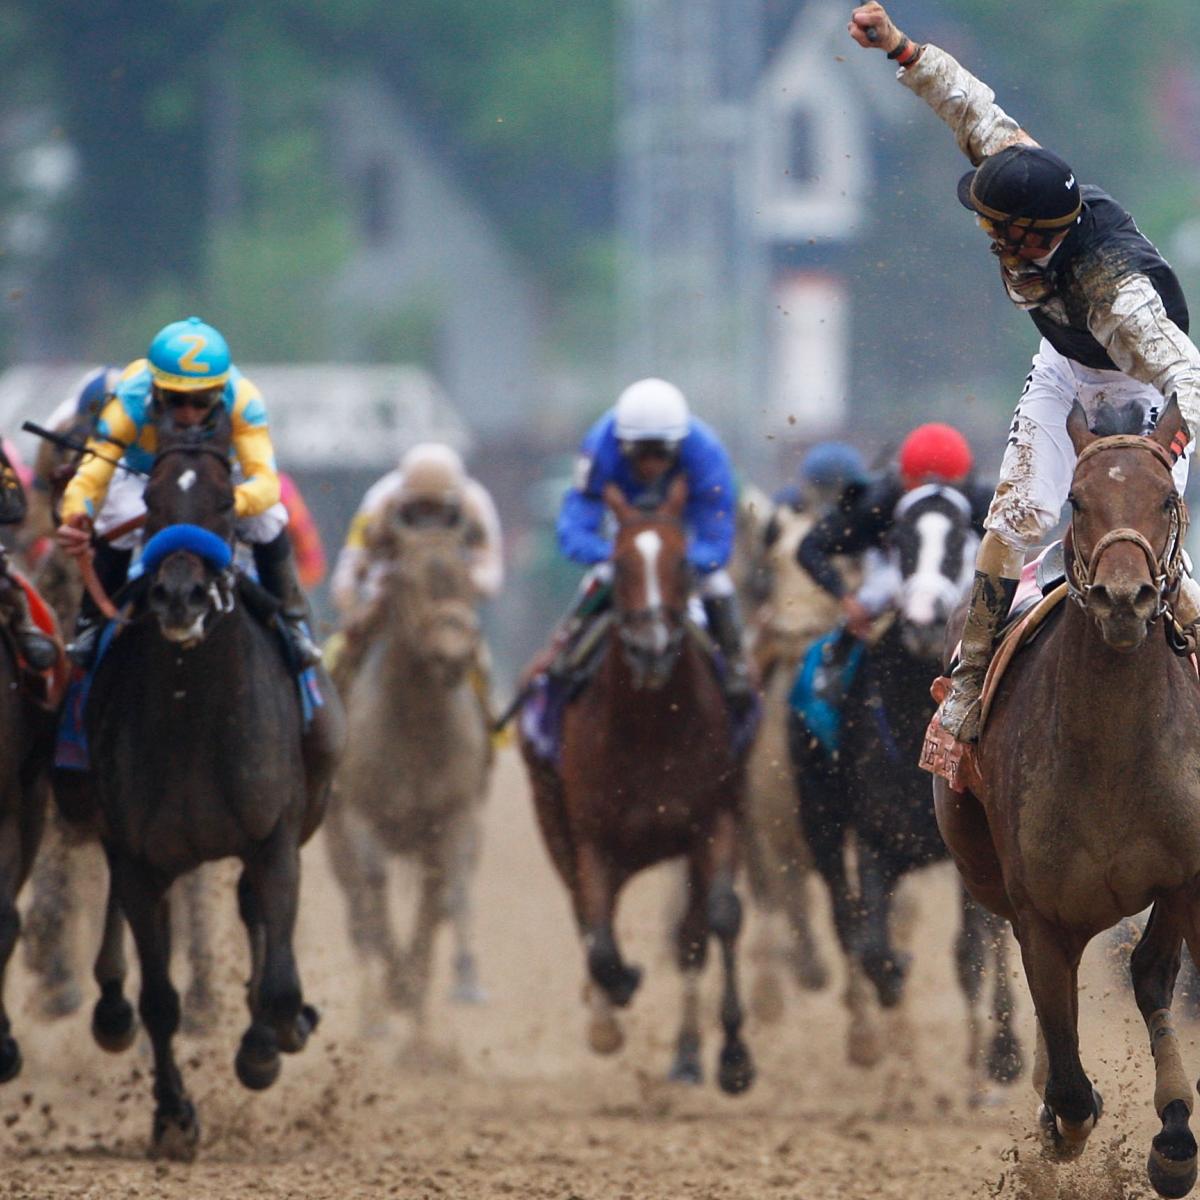 Kentucky Derby 2012 Why This Is the Year for a Longshot Winner News